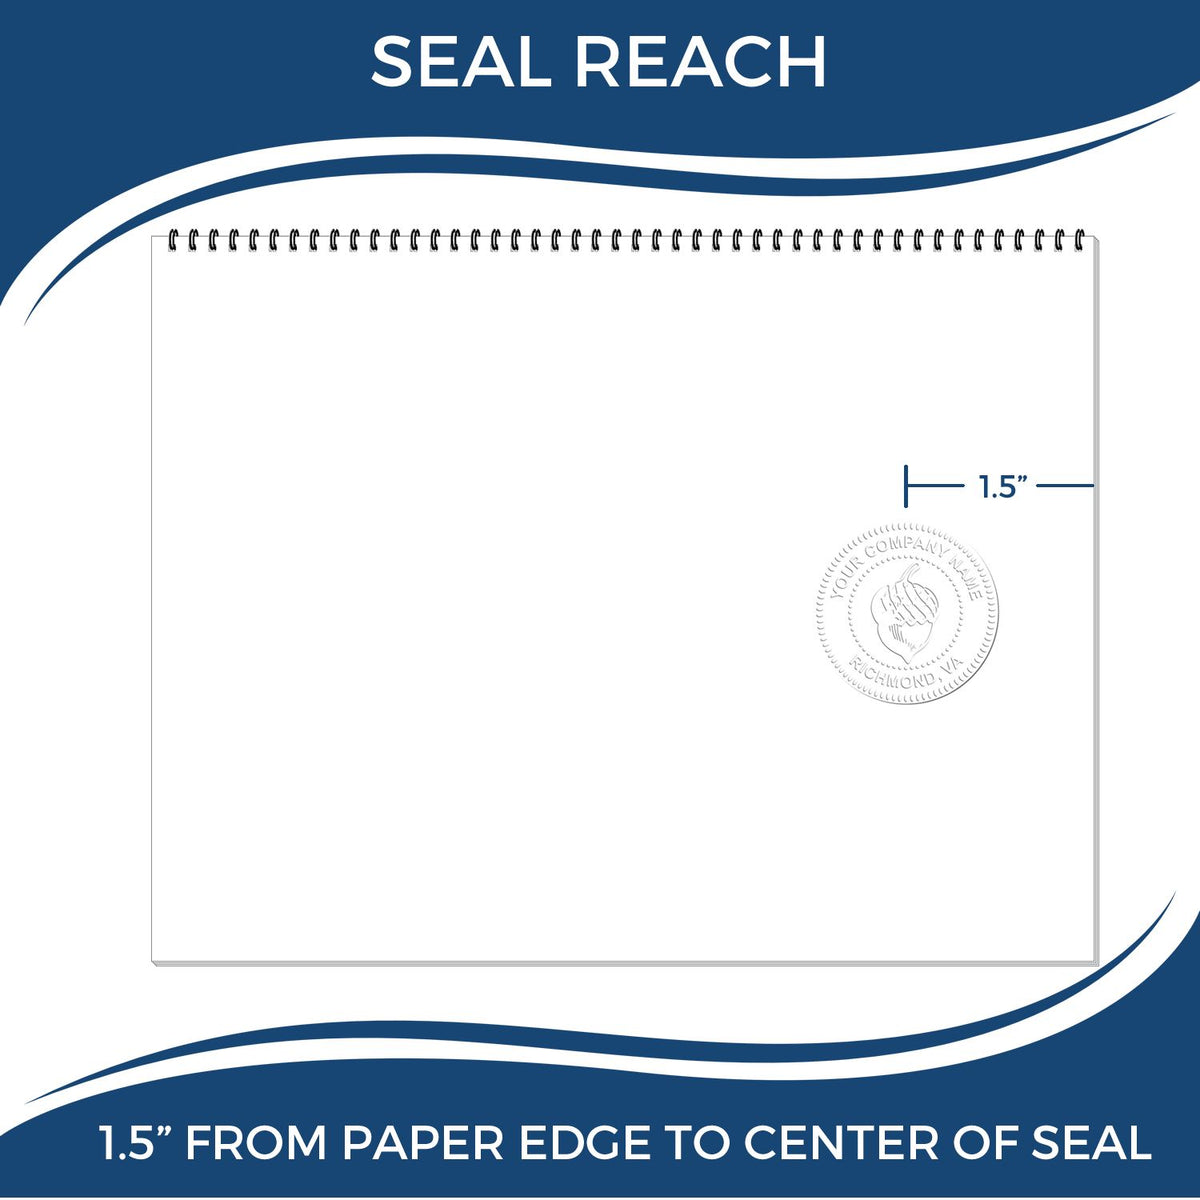 An infographic showing the seal reach which is represented by a ruler and a miniature seal image of the Hybrid Virginia Engineer Seal